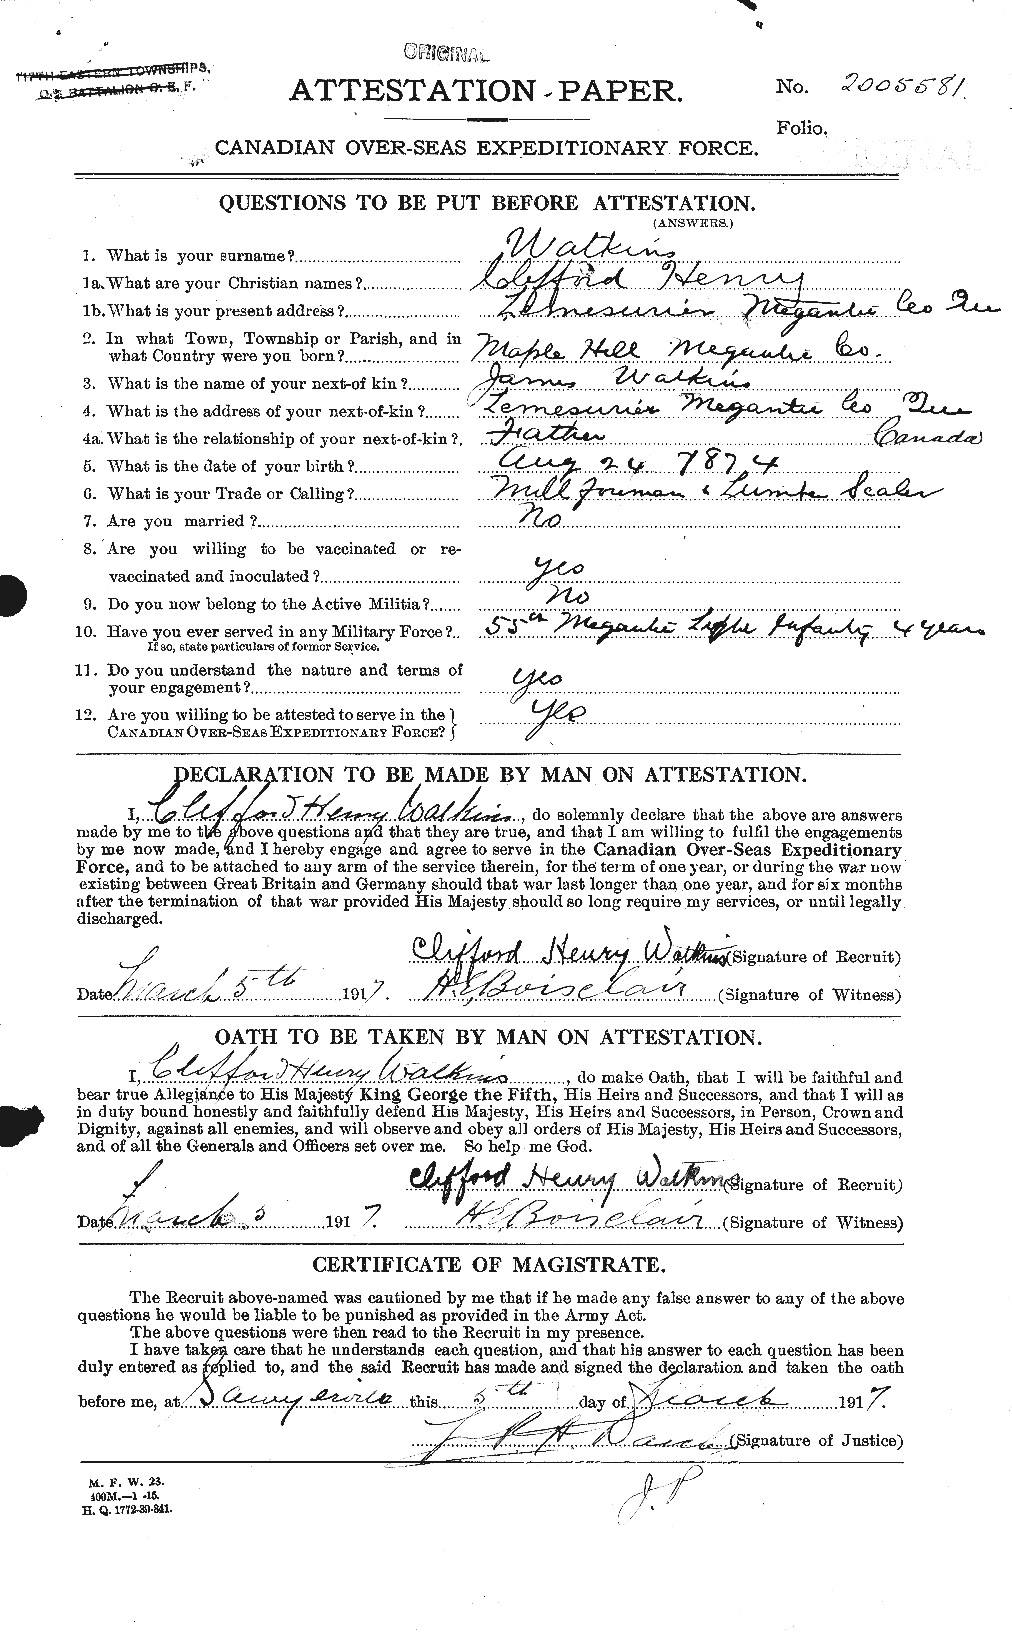 Personnel Records of the First World War - CEF 659176a